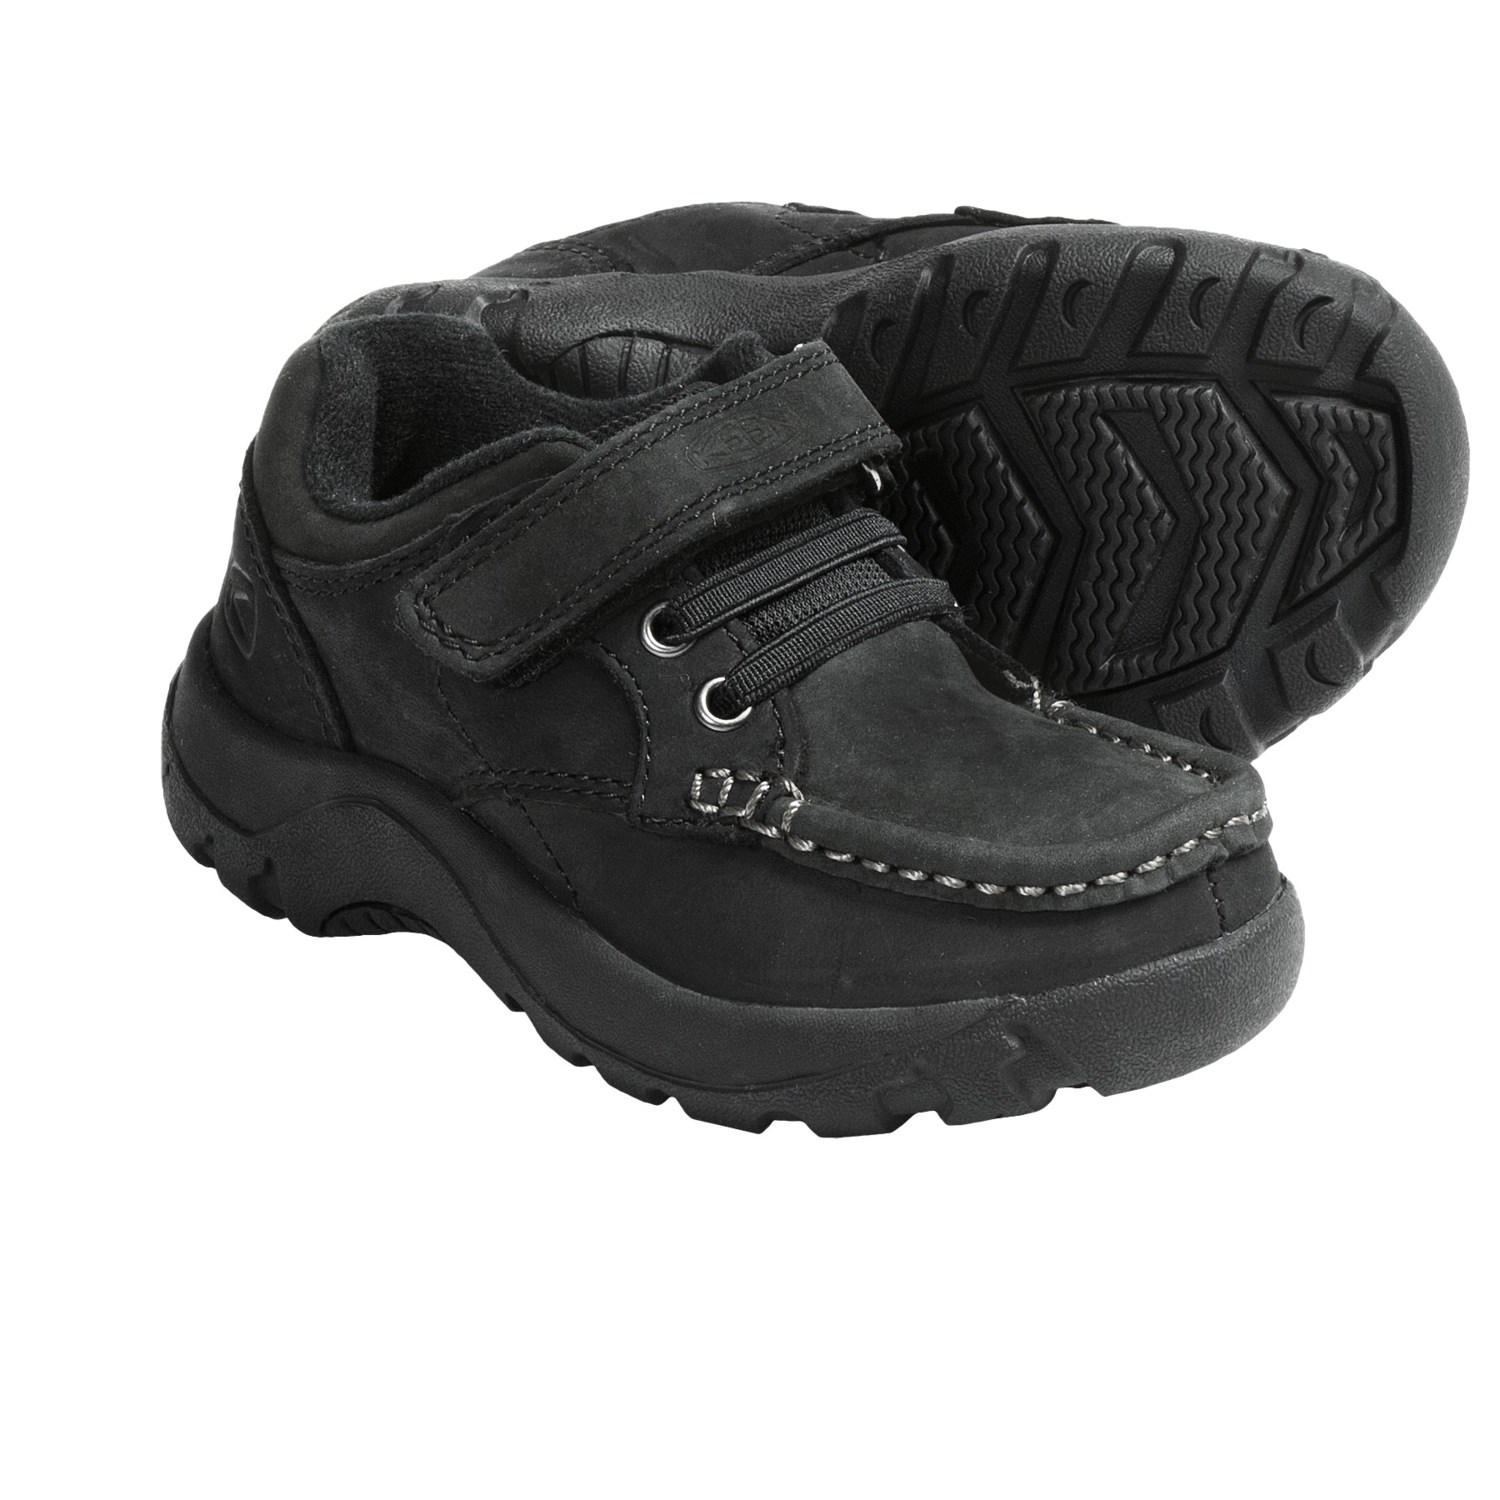 Keen Nopo Low Shoes - Nubuck (For Kids) - Save 36%